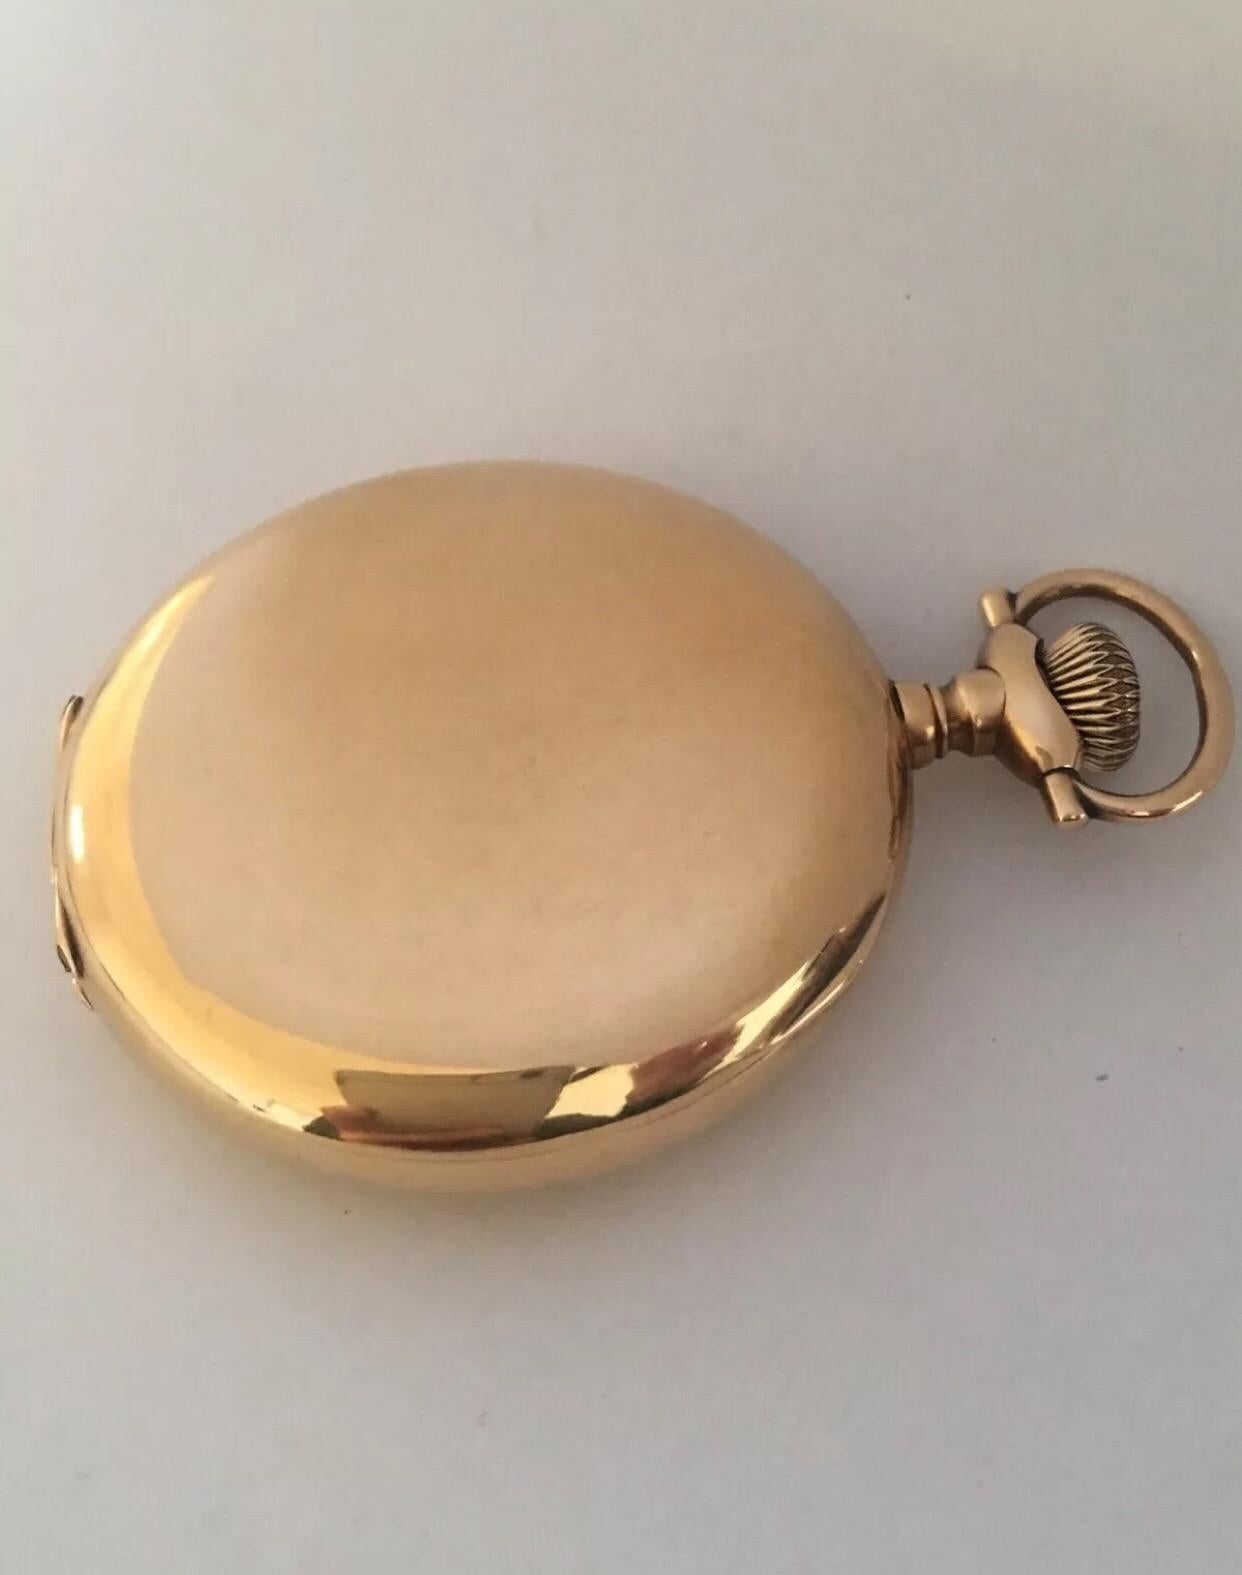 This beautiful antique 50mm diameter enamel dial hand winding pocket watch is in good working condition. And it is running well. Visible signs of ageing and wear with light tiny scratches on the gold watch case. This watch weighed 100 grams . The